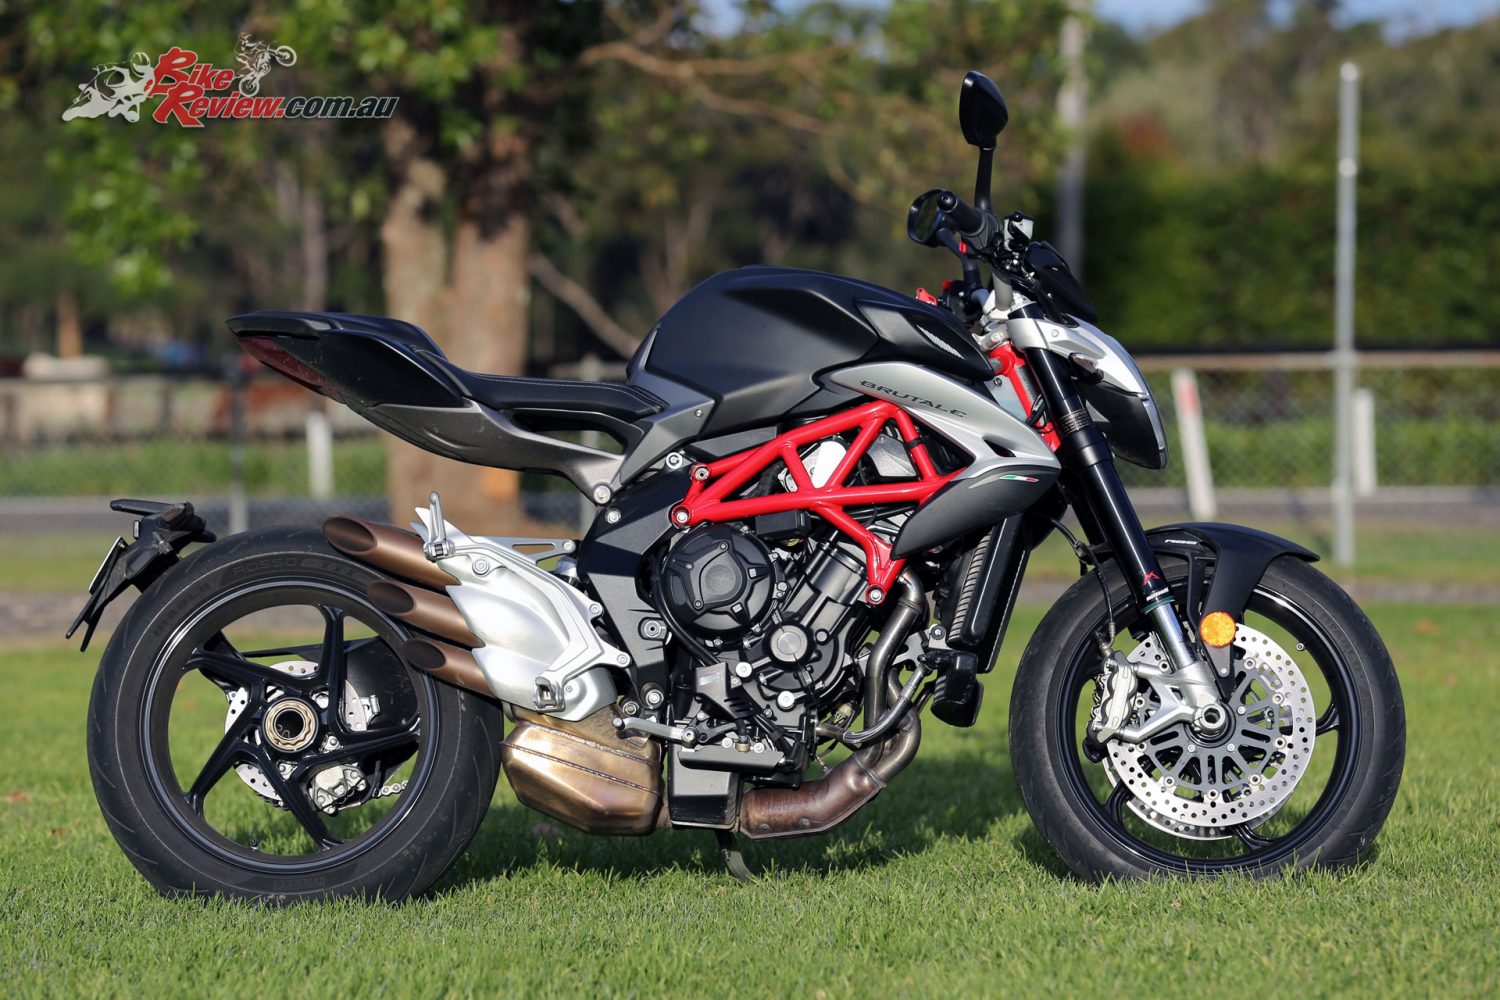 2018 Brutale 800 RR MV Agusta Naked Motorcycle - Review Specs